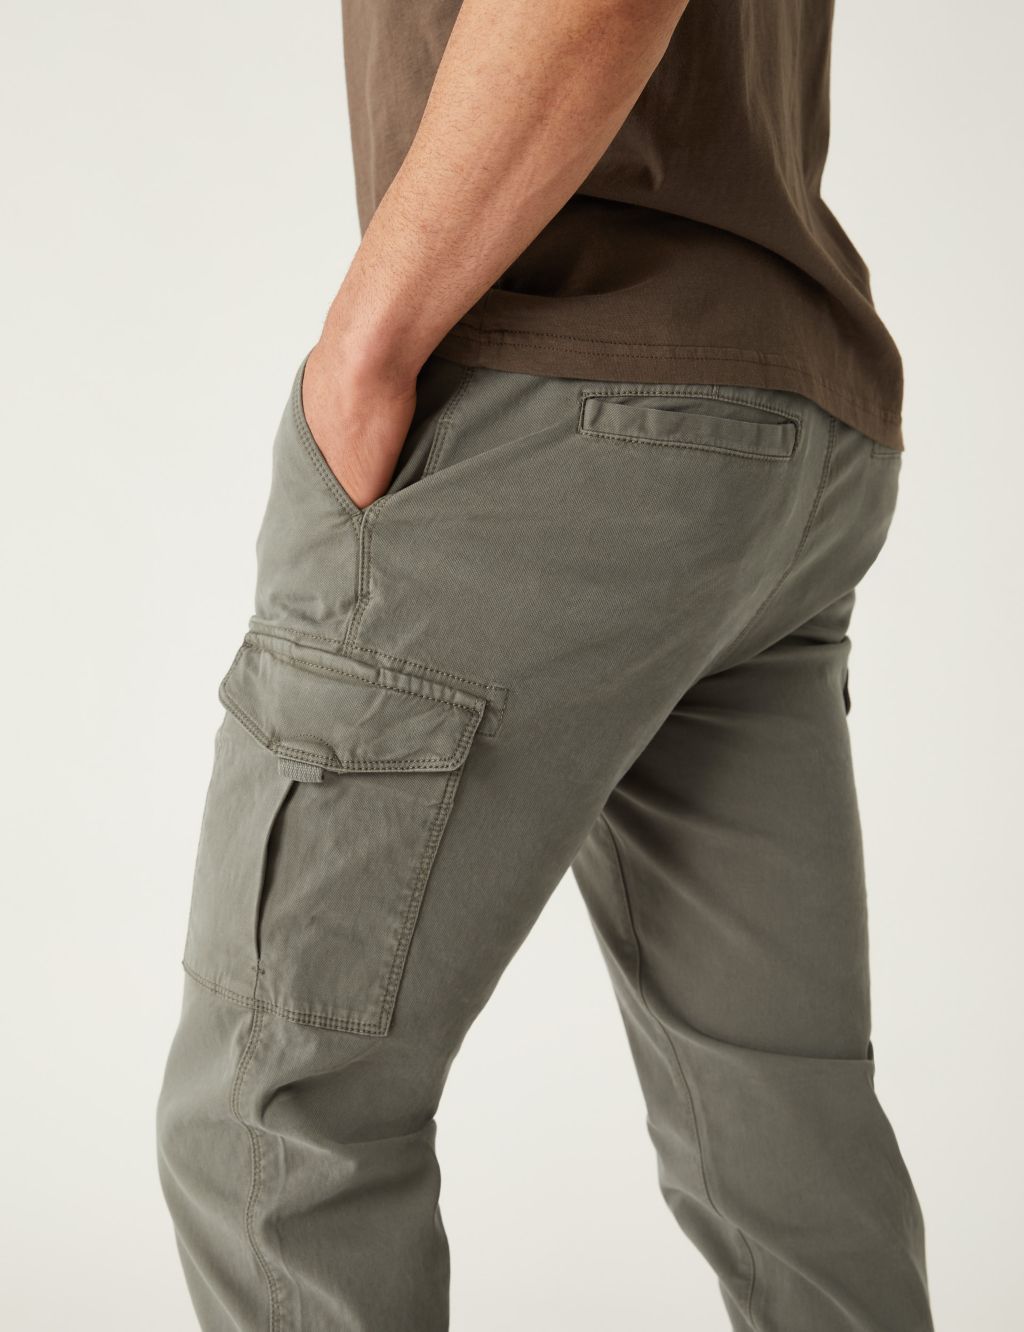 Slim Fit Textured Stretch Cargo Trousers image 2